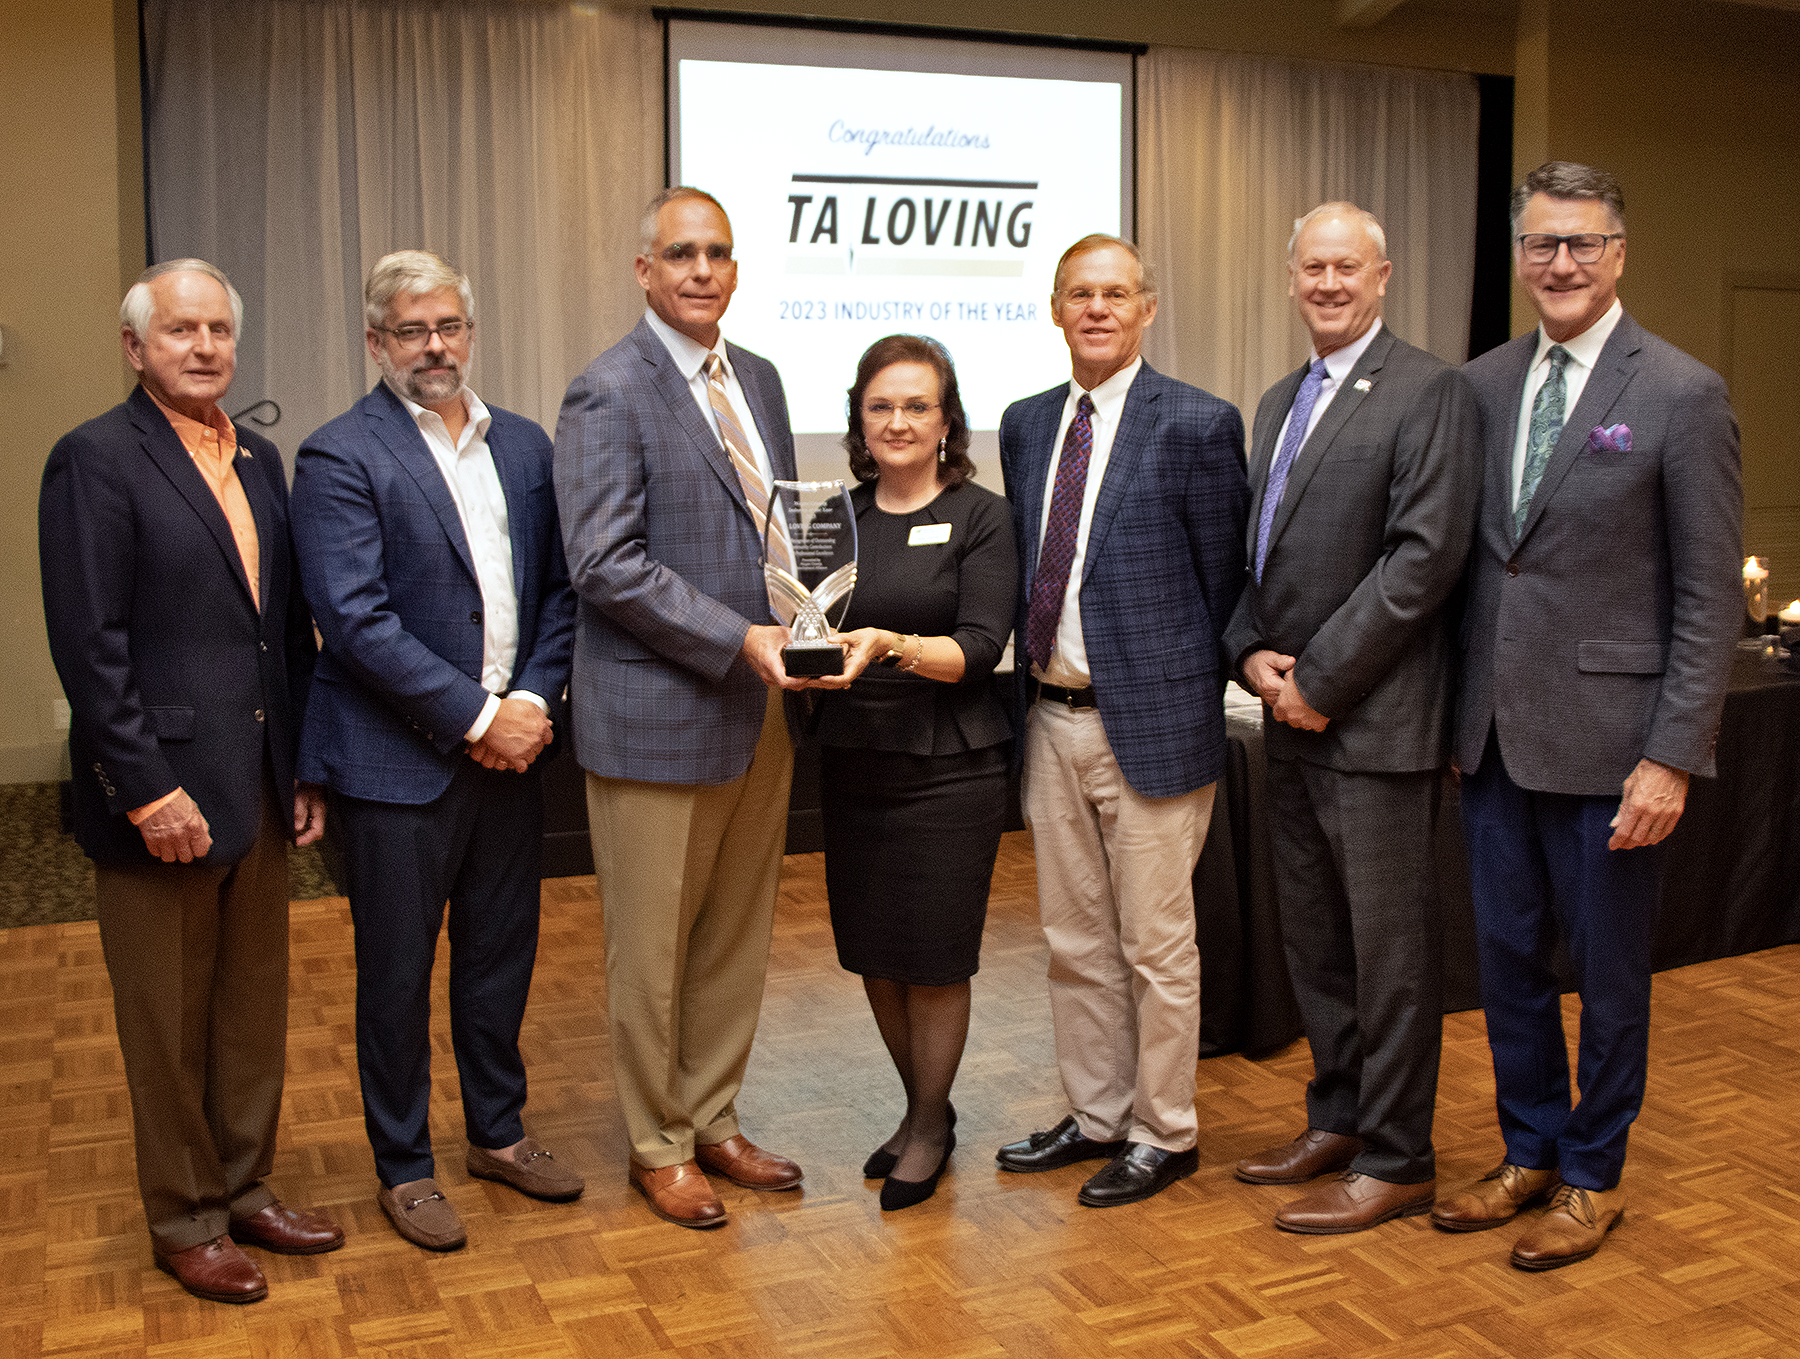 T.A. Loving Company Receives Industry of the Year Award – Wayne County, NC